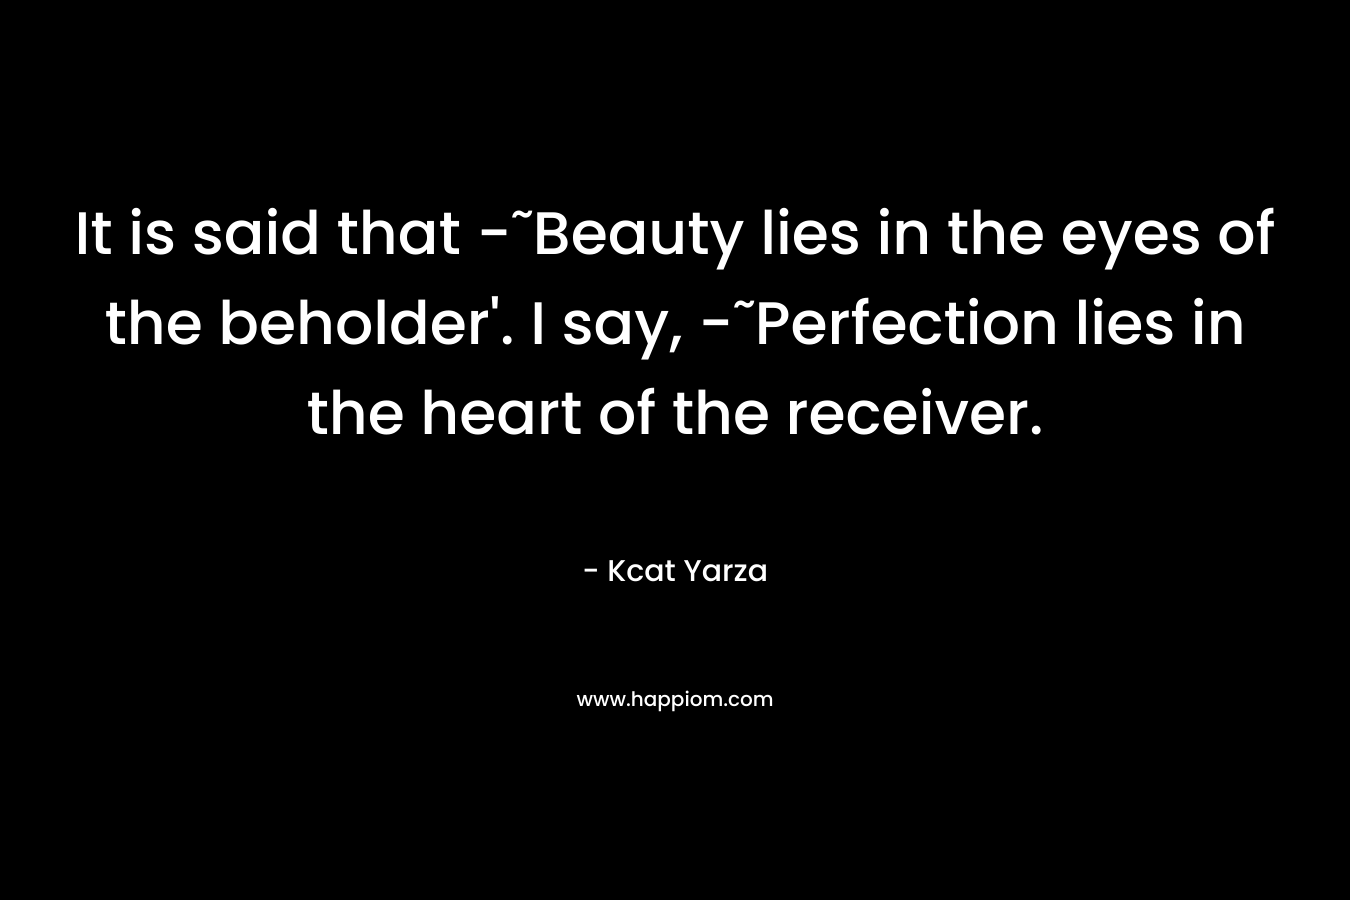 It is said that -˜Beauty lies in the eyes of the beholder’. I say, -˜Perfection lies in the heart of the receiver. – Kcat Yarza